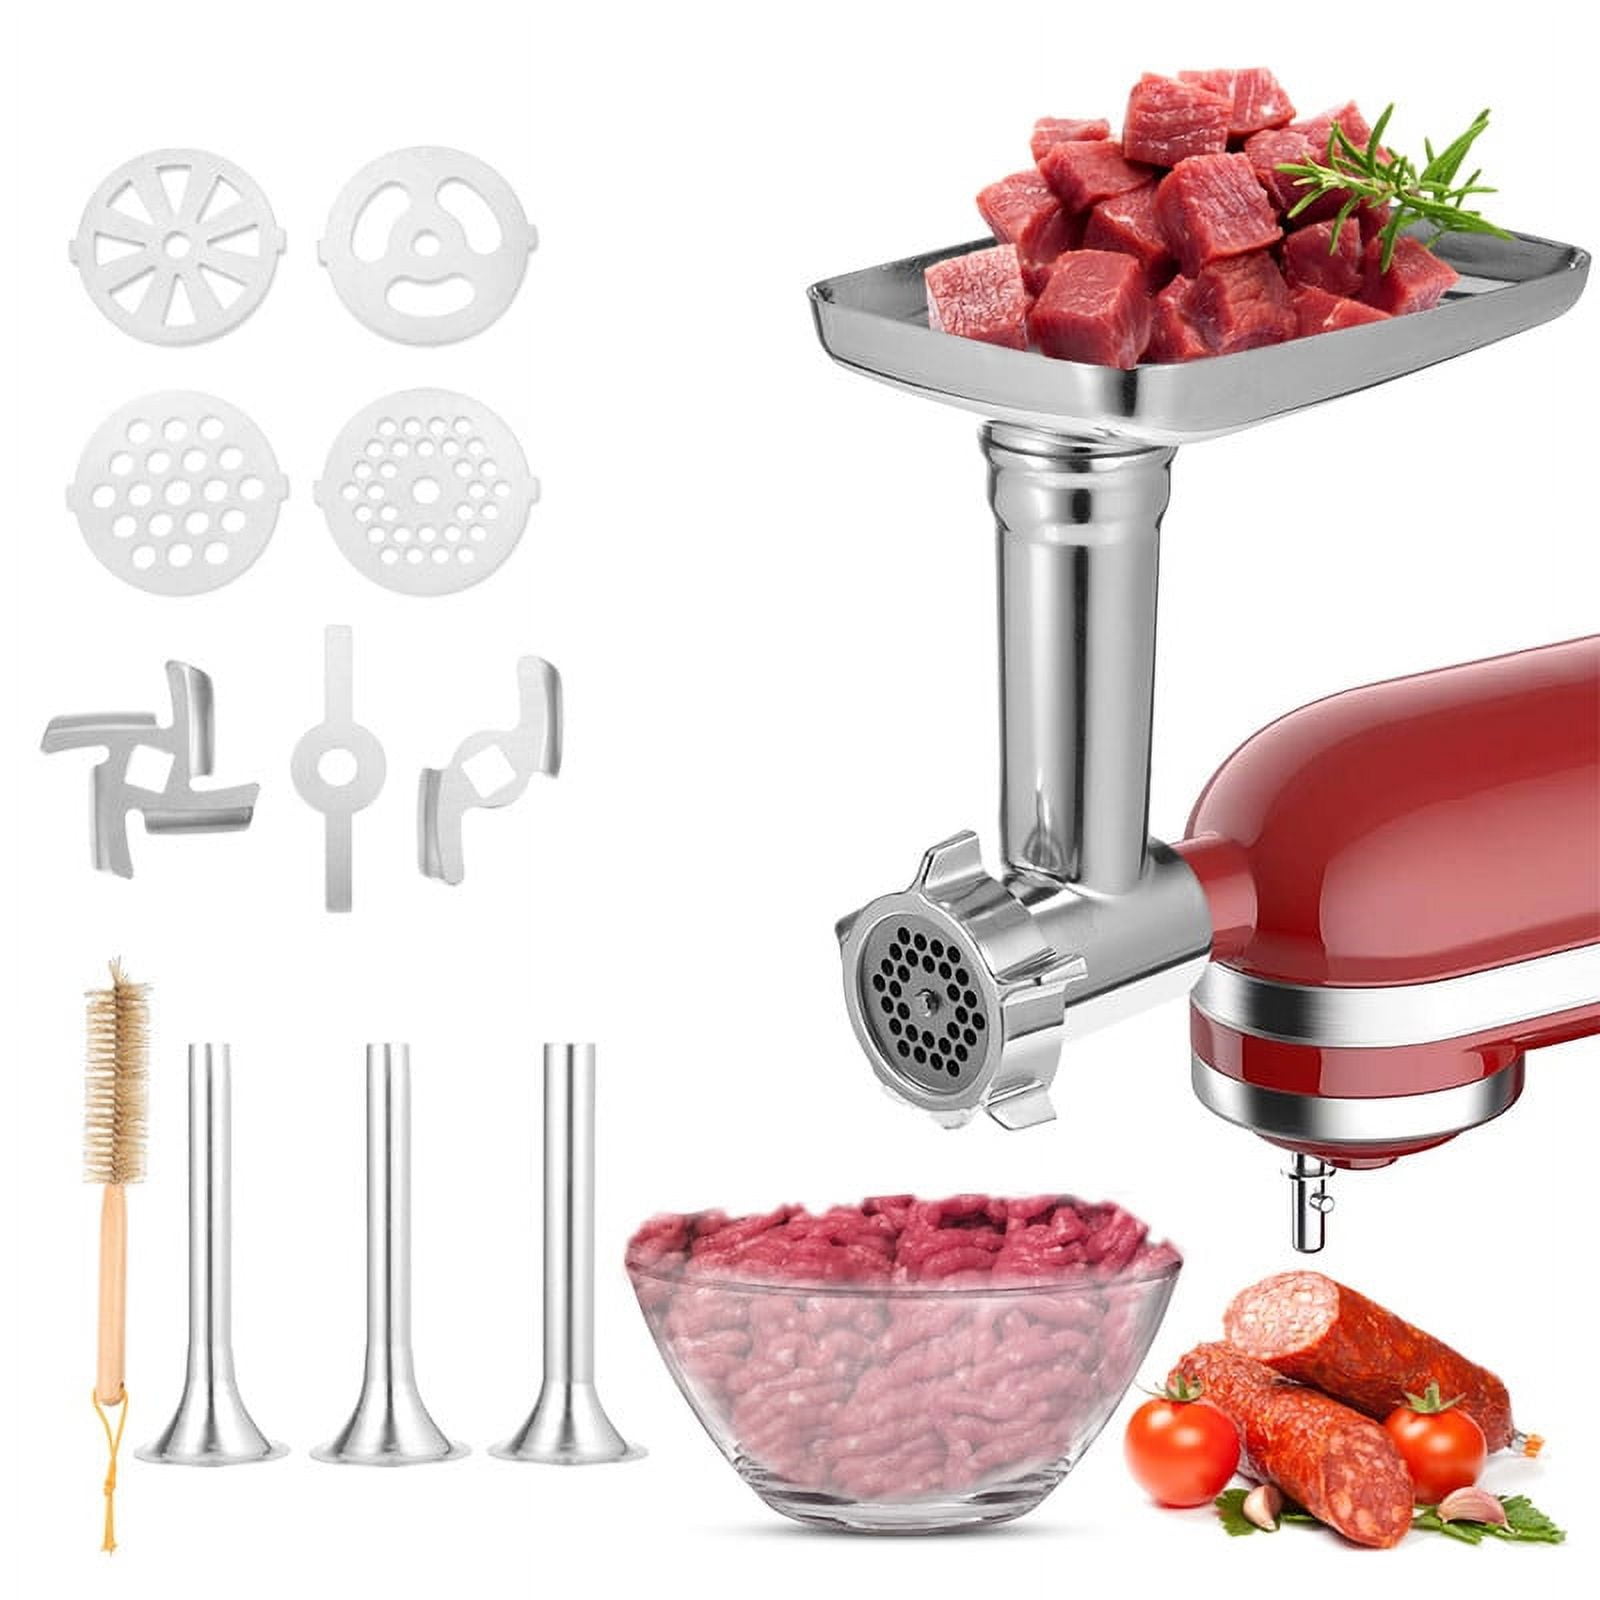 Slicer accessories and meat grinder 2 in 1 for KitchenAid vertical mixer,  accessories for vegetable mixing and meat processing - AliExpress